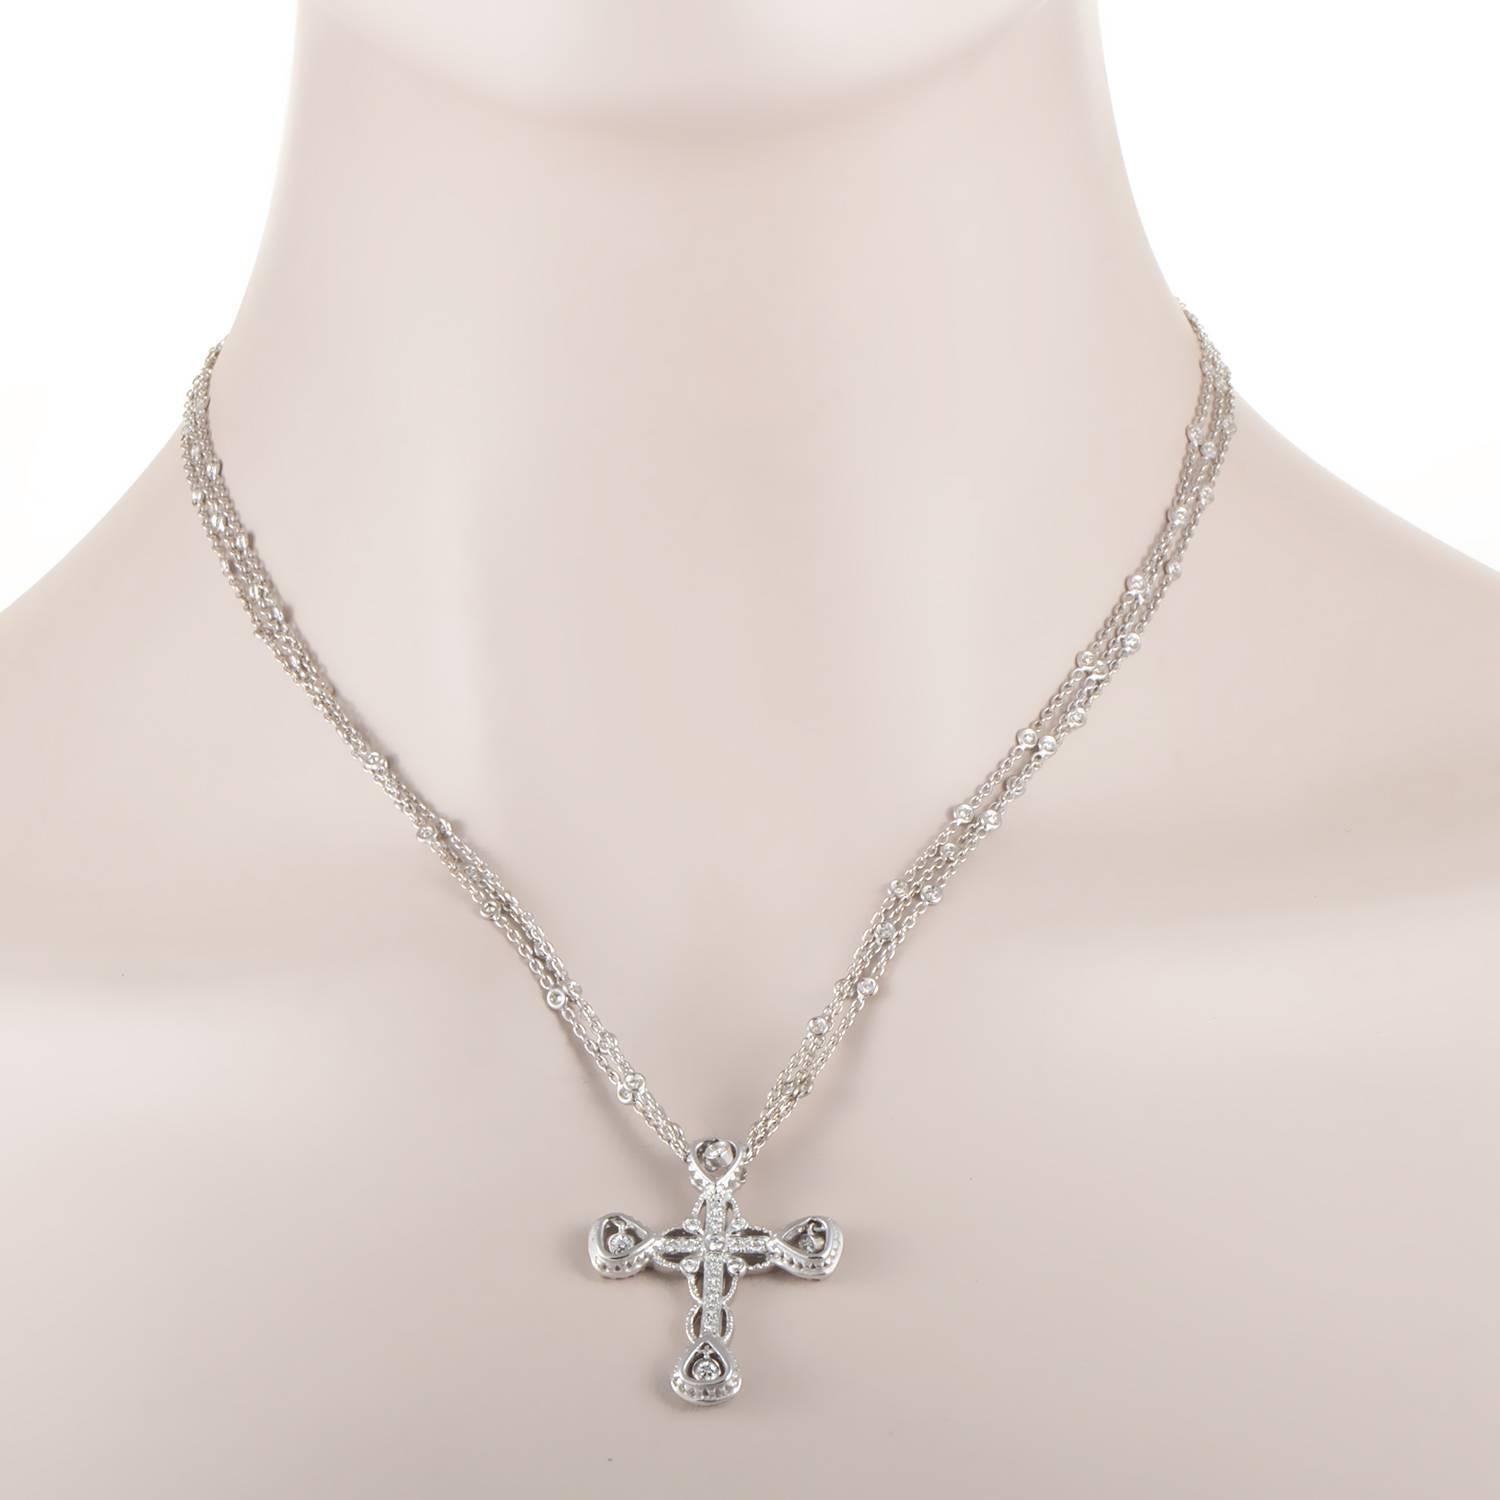 A magnificently graceful and ornate interpretation of the powerful symbol of a cross, this exceptional 18K white gold necklace from Doris Panos boasts a marvelous pendant embellished with 1.80 carats of glistening diamonds for a wonderfully bright